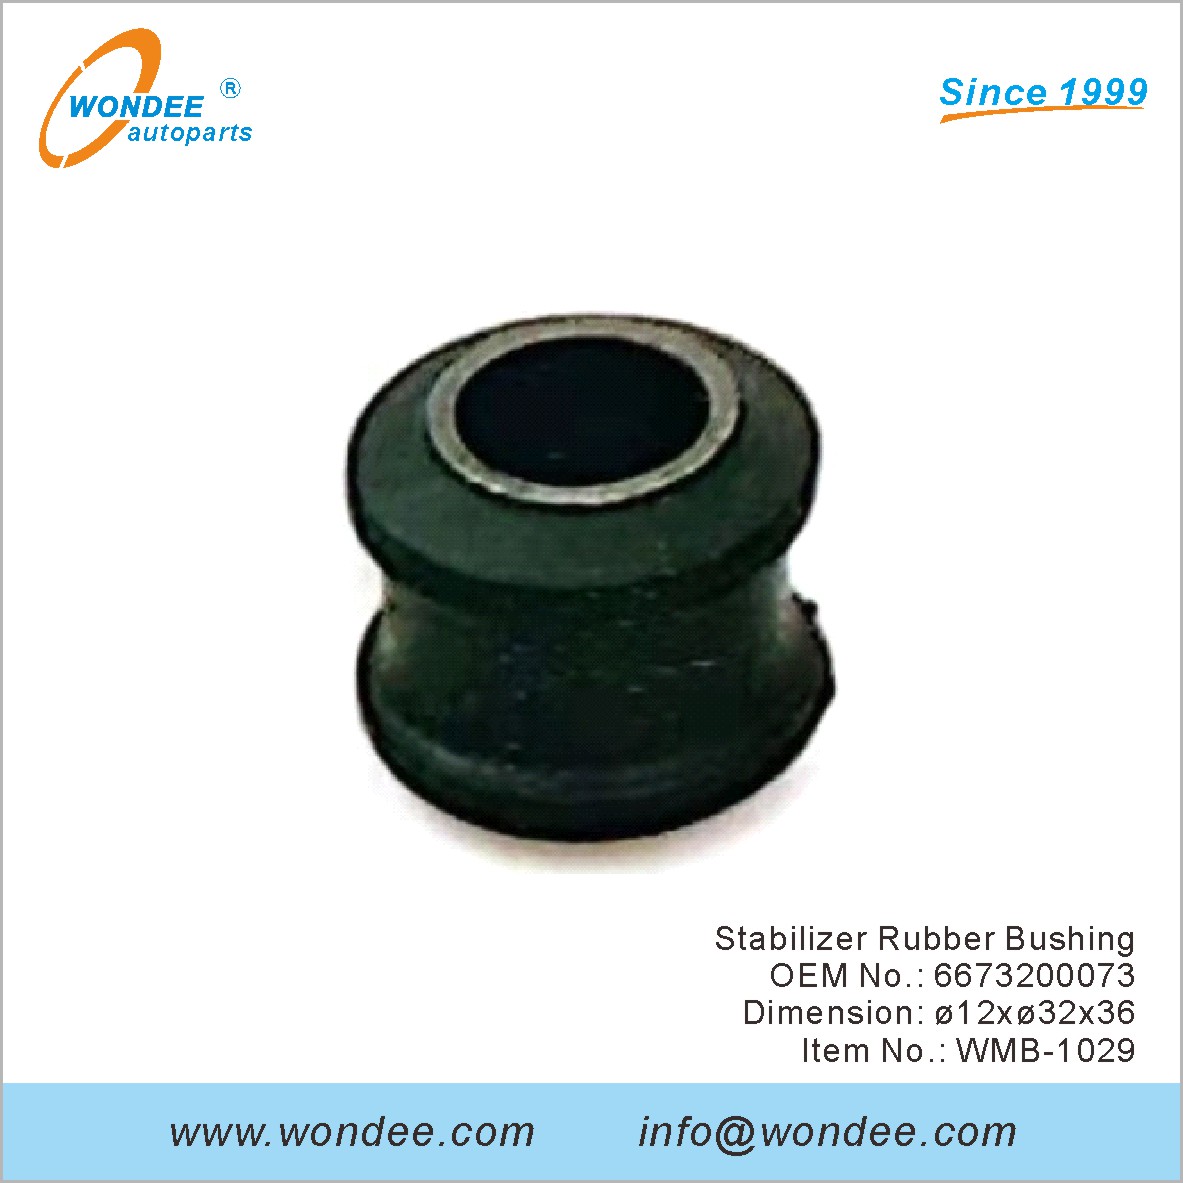 Stabilizer Rubber Bushing OEM 6673200073 for Benz from WONDEE